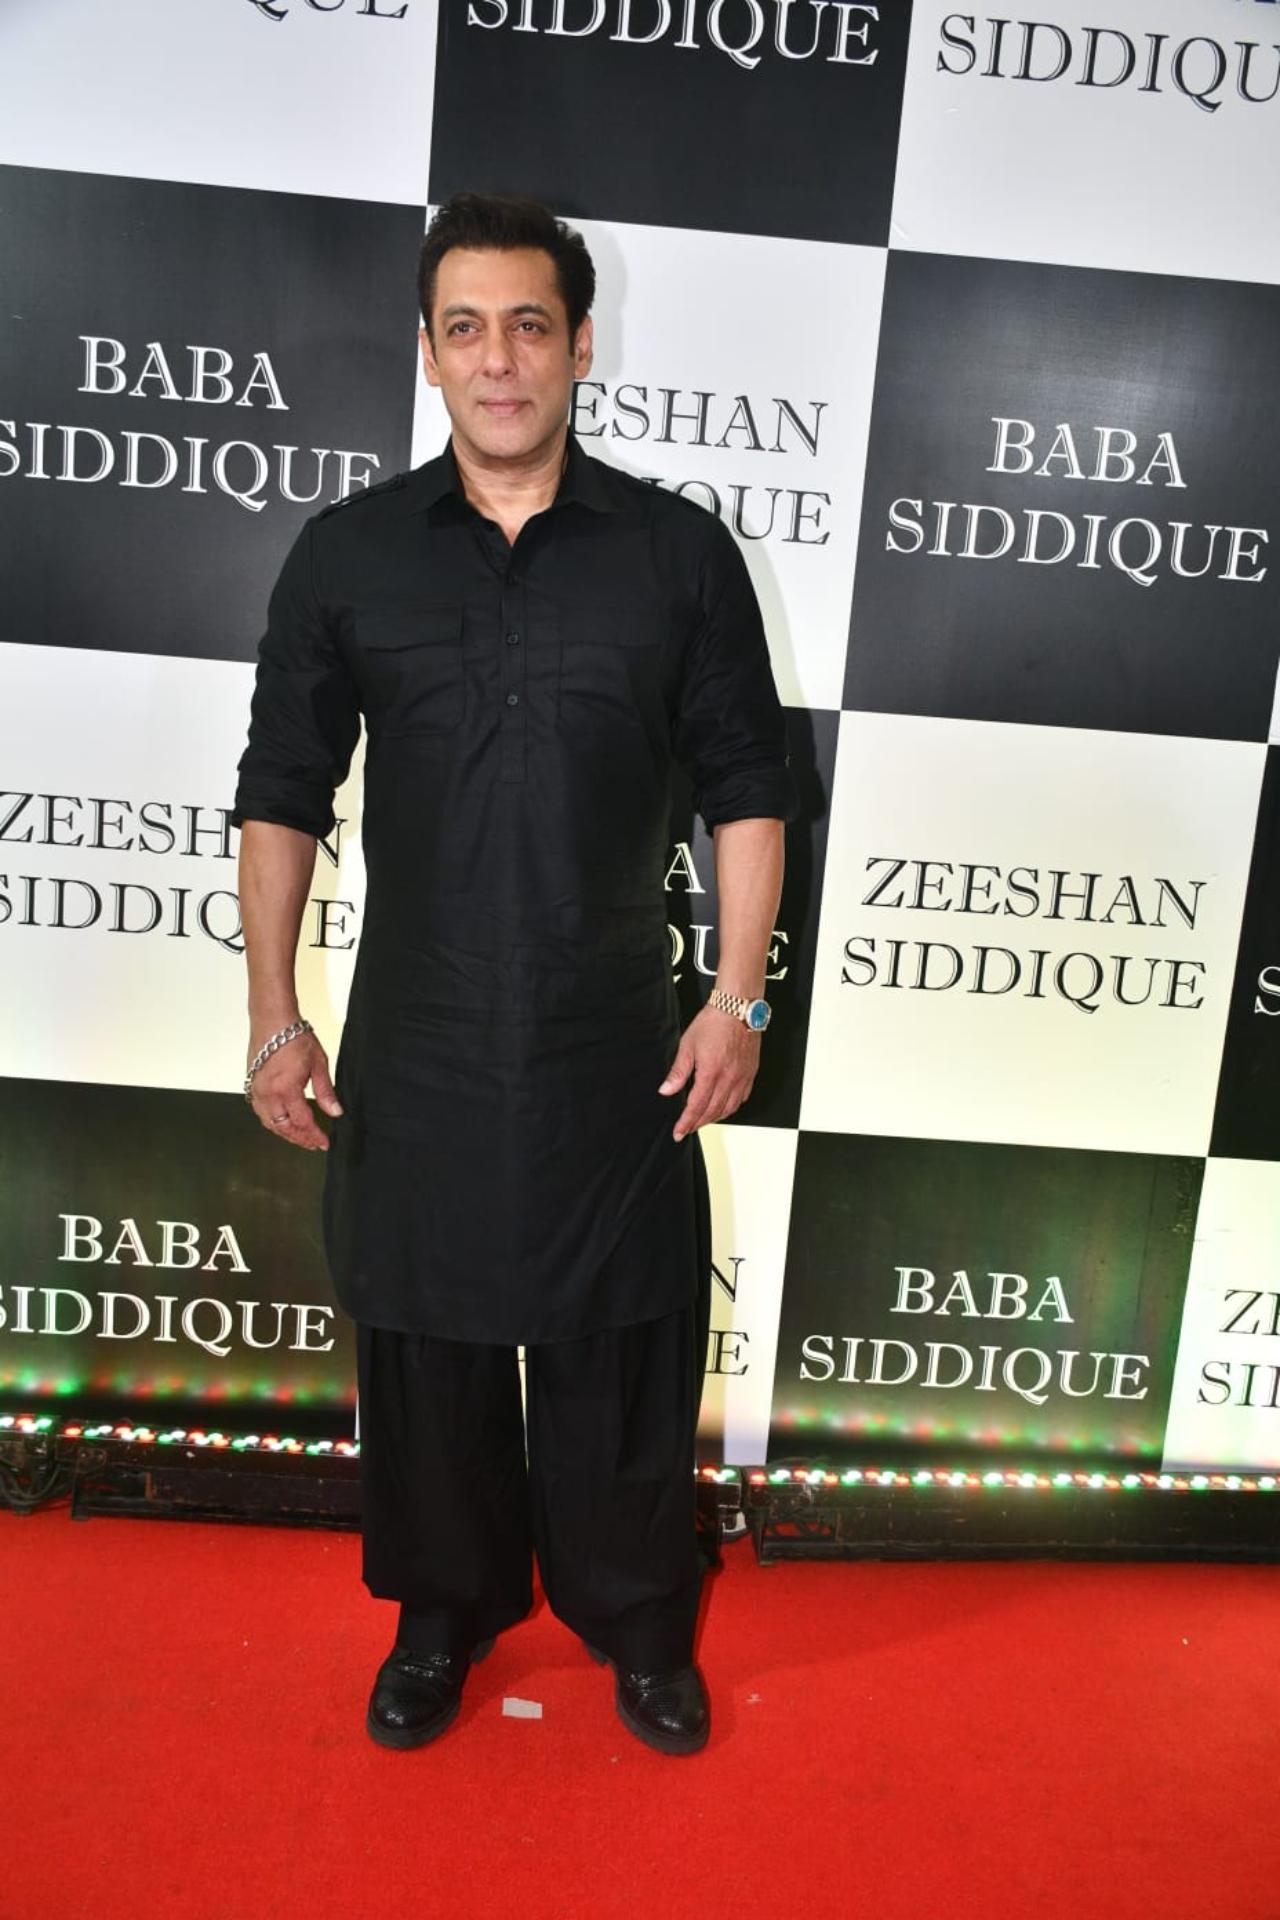 Topping the chart of stars would be Salman Khan. Bhaijaan sported a black Pathan suit for the occasion